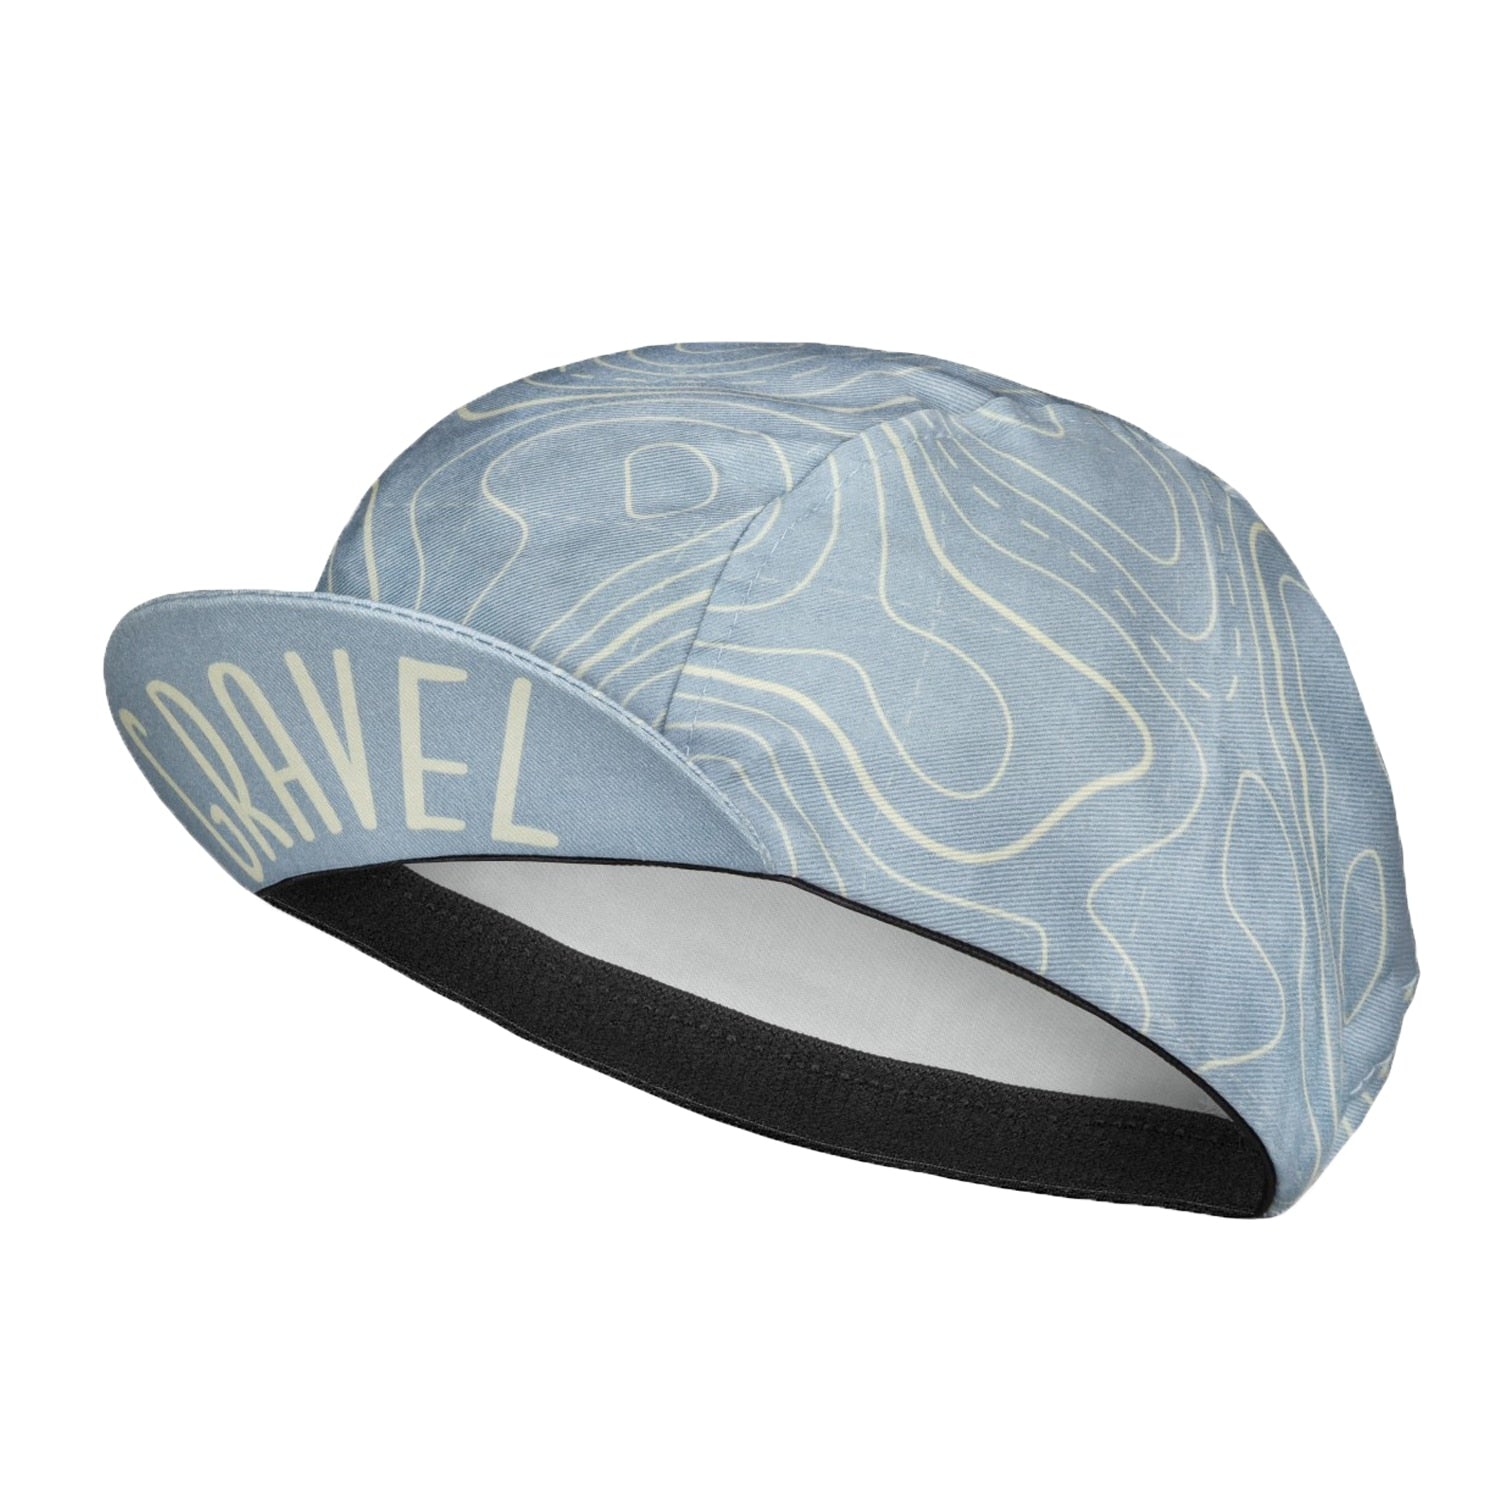 Classic Retro Polyester For Bicycle Men's Caps Mtb Enduro Customized Cycle Summer Cool Hats